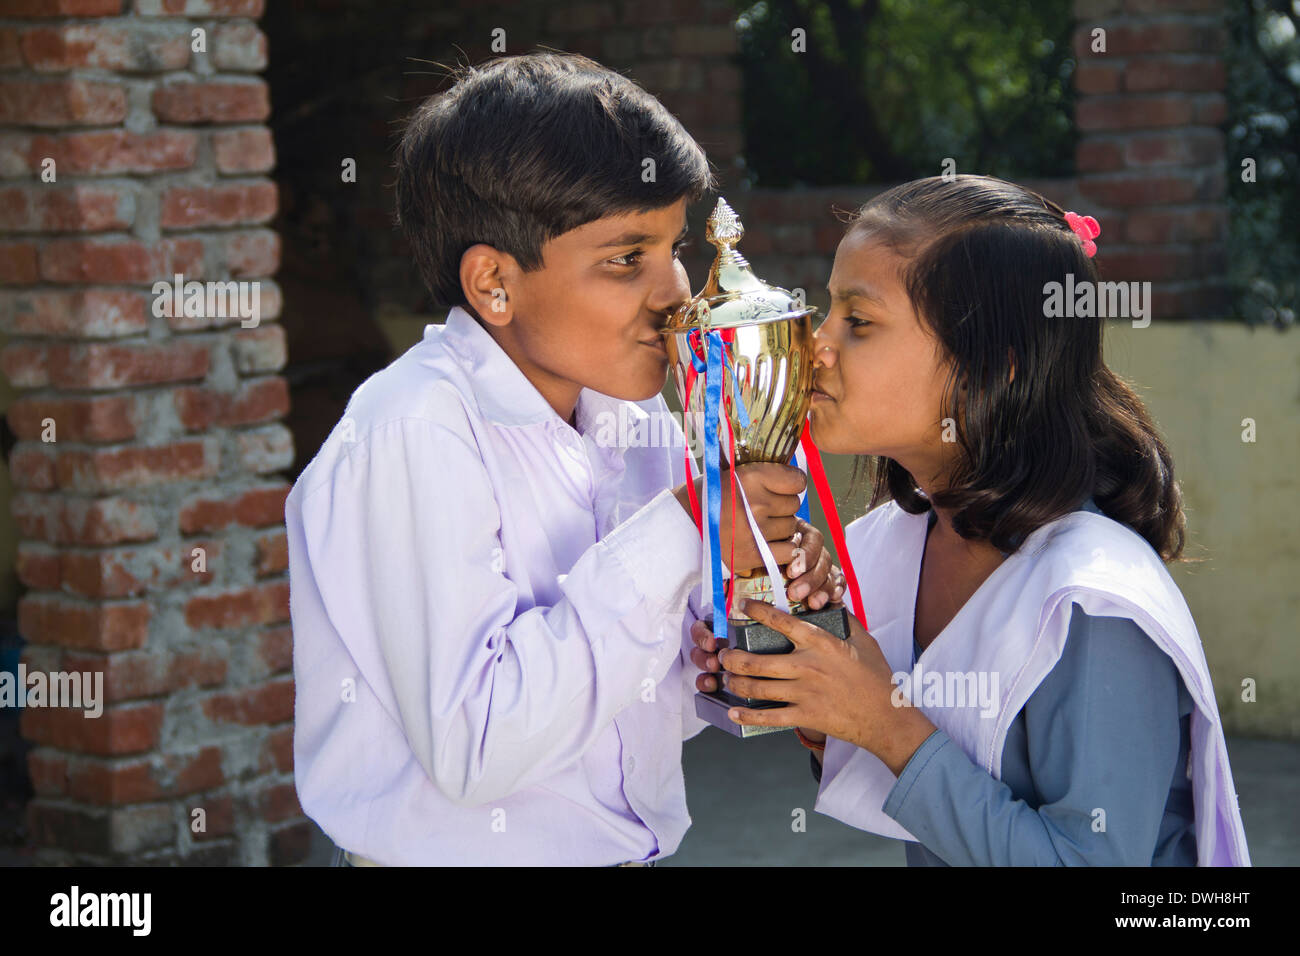 Indian Rural Kids standing with Trophy at Home Stock Photo